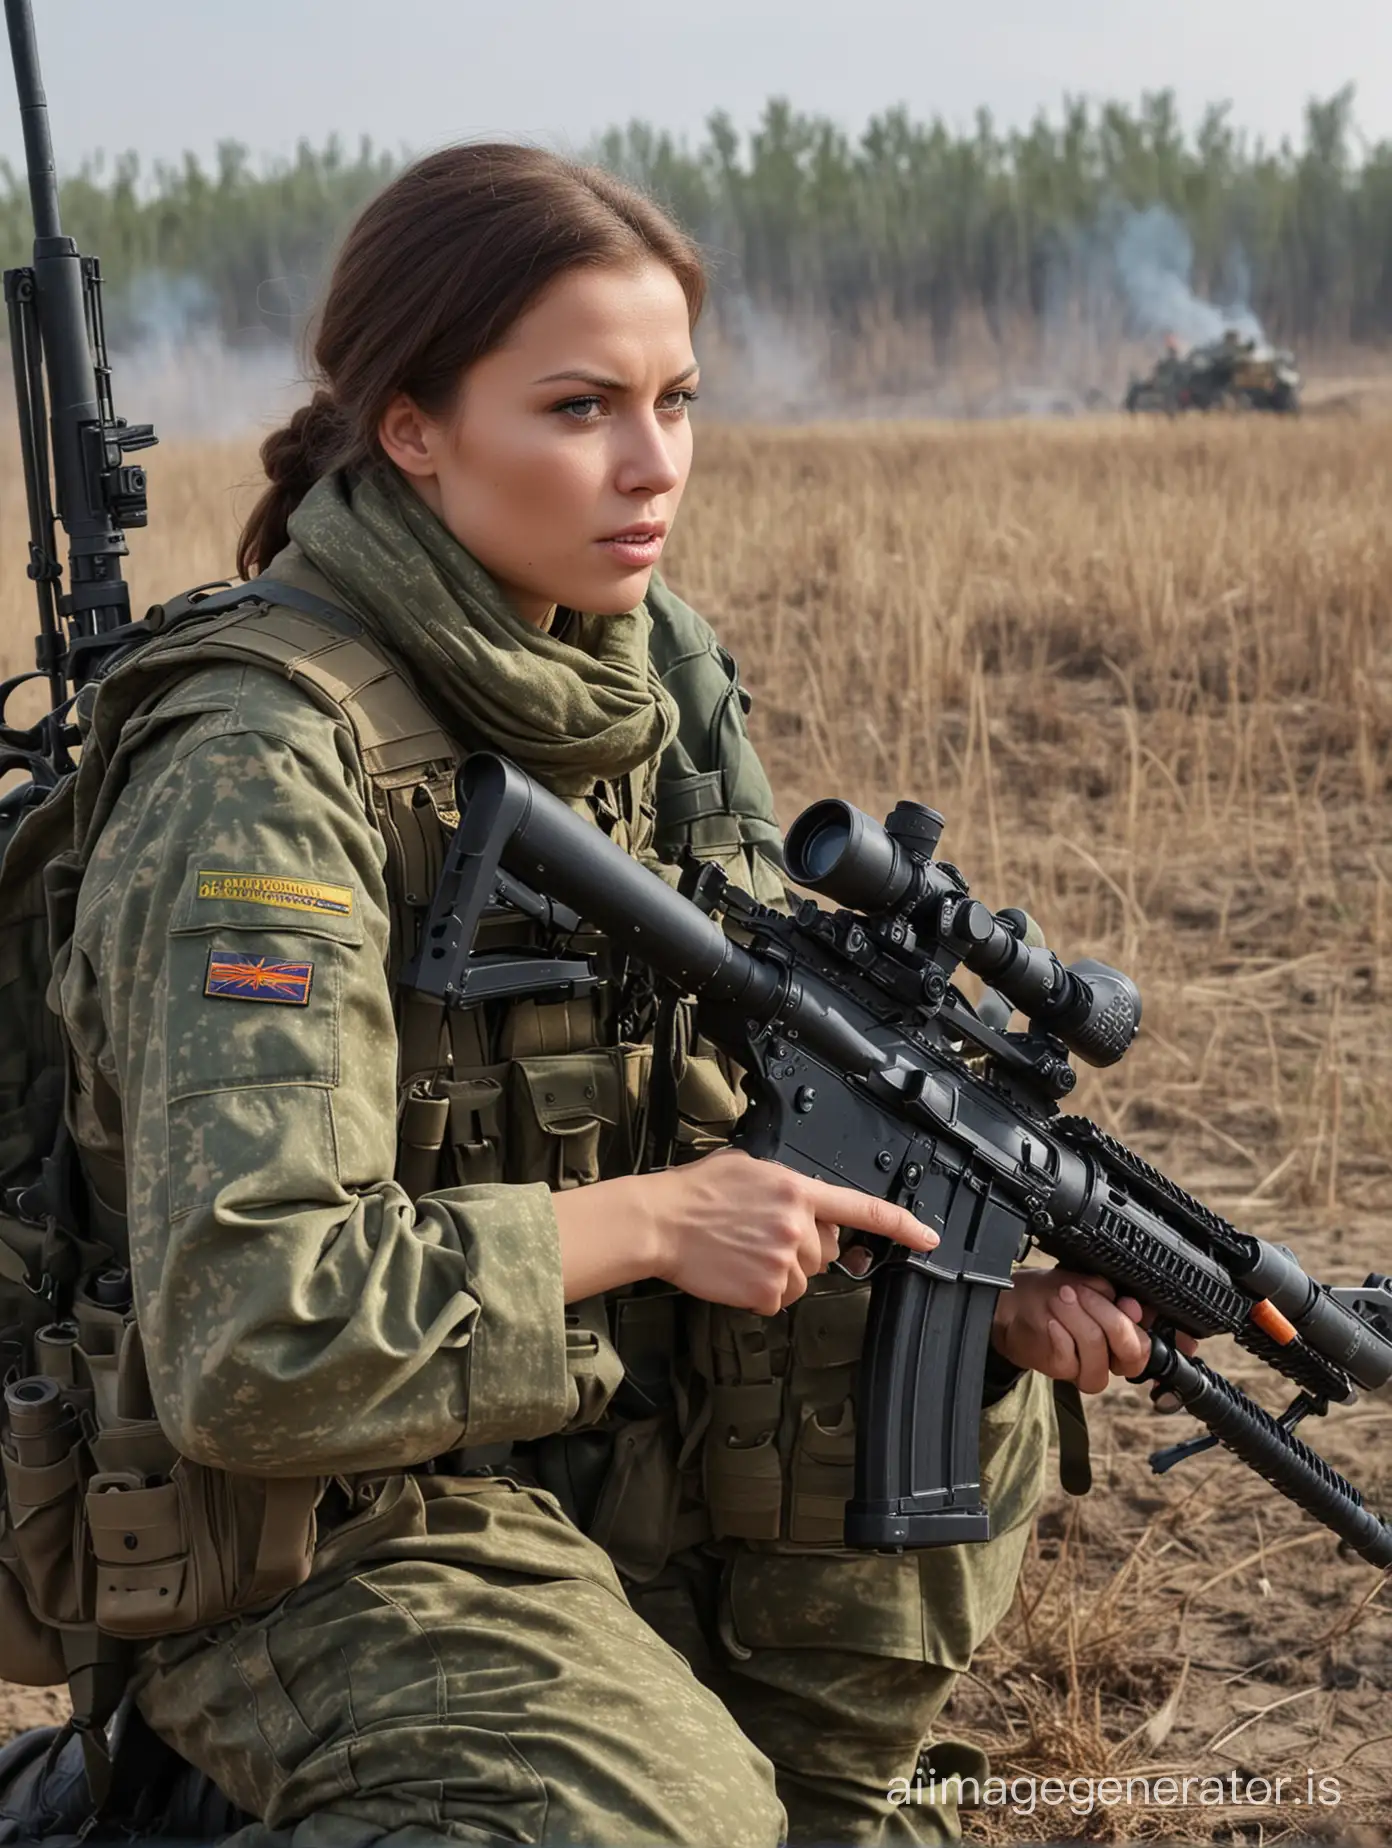 Ukrainian-Female-Soldiers-Maneuvering-with-Rocket-Launchers-and-Sniper-Rifles-in-HighDefinition-Battle-Scene